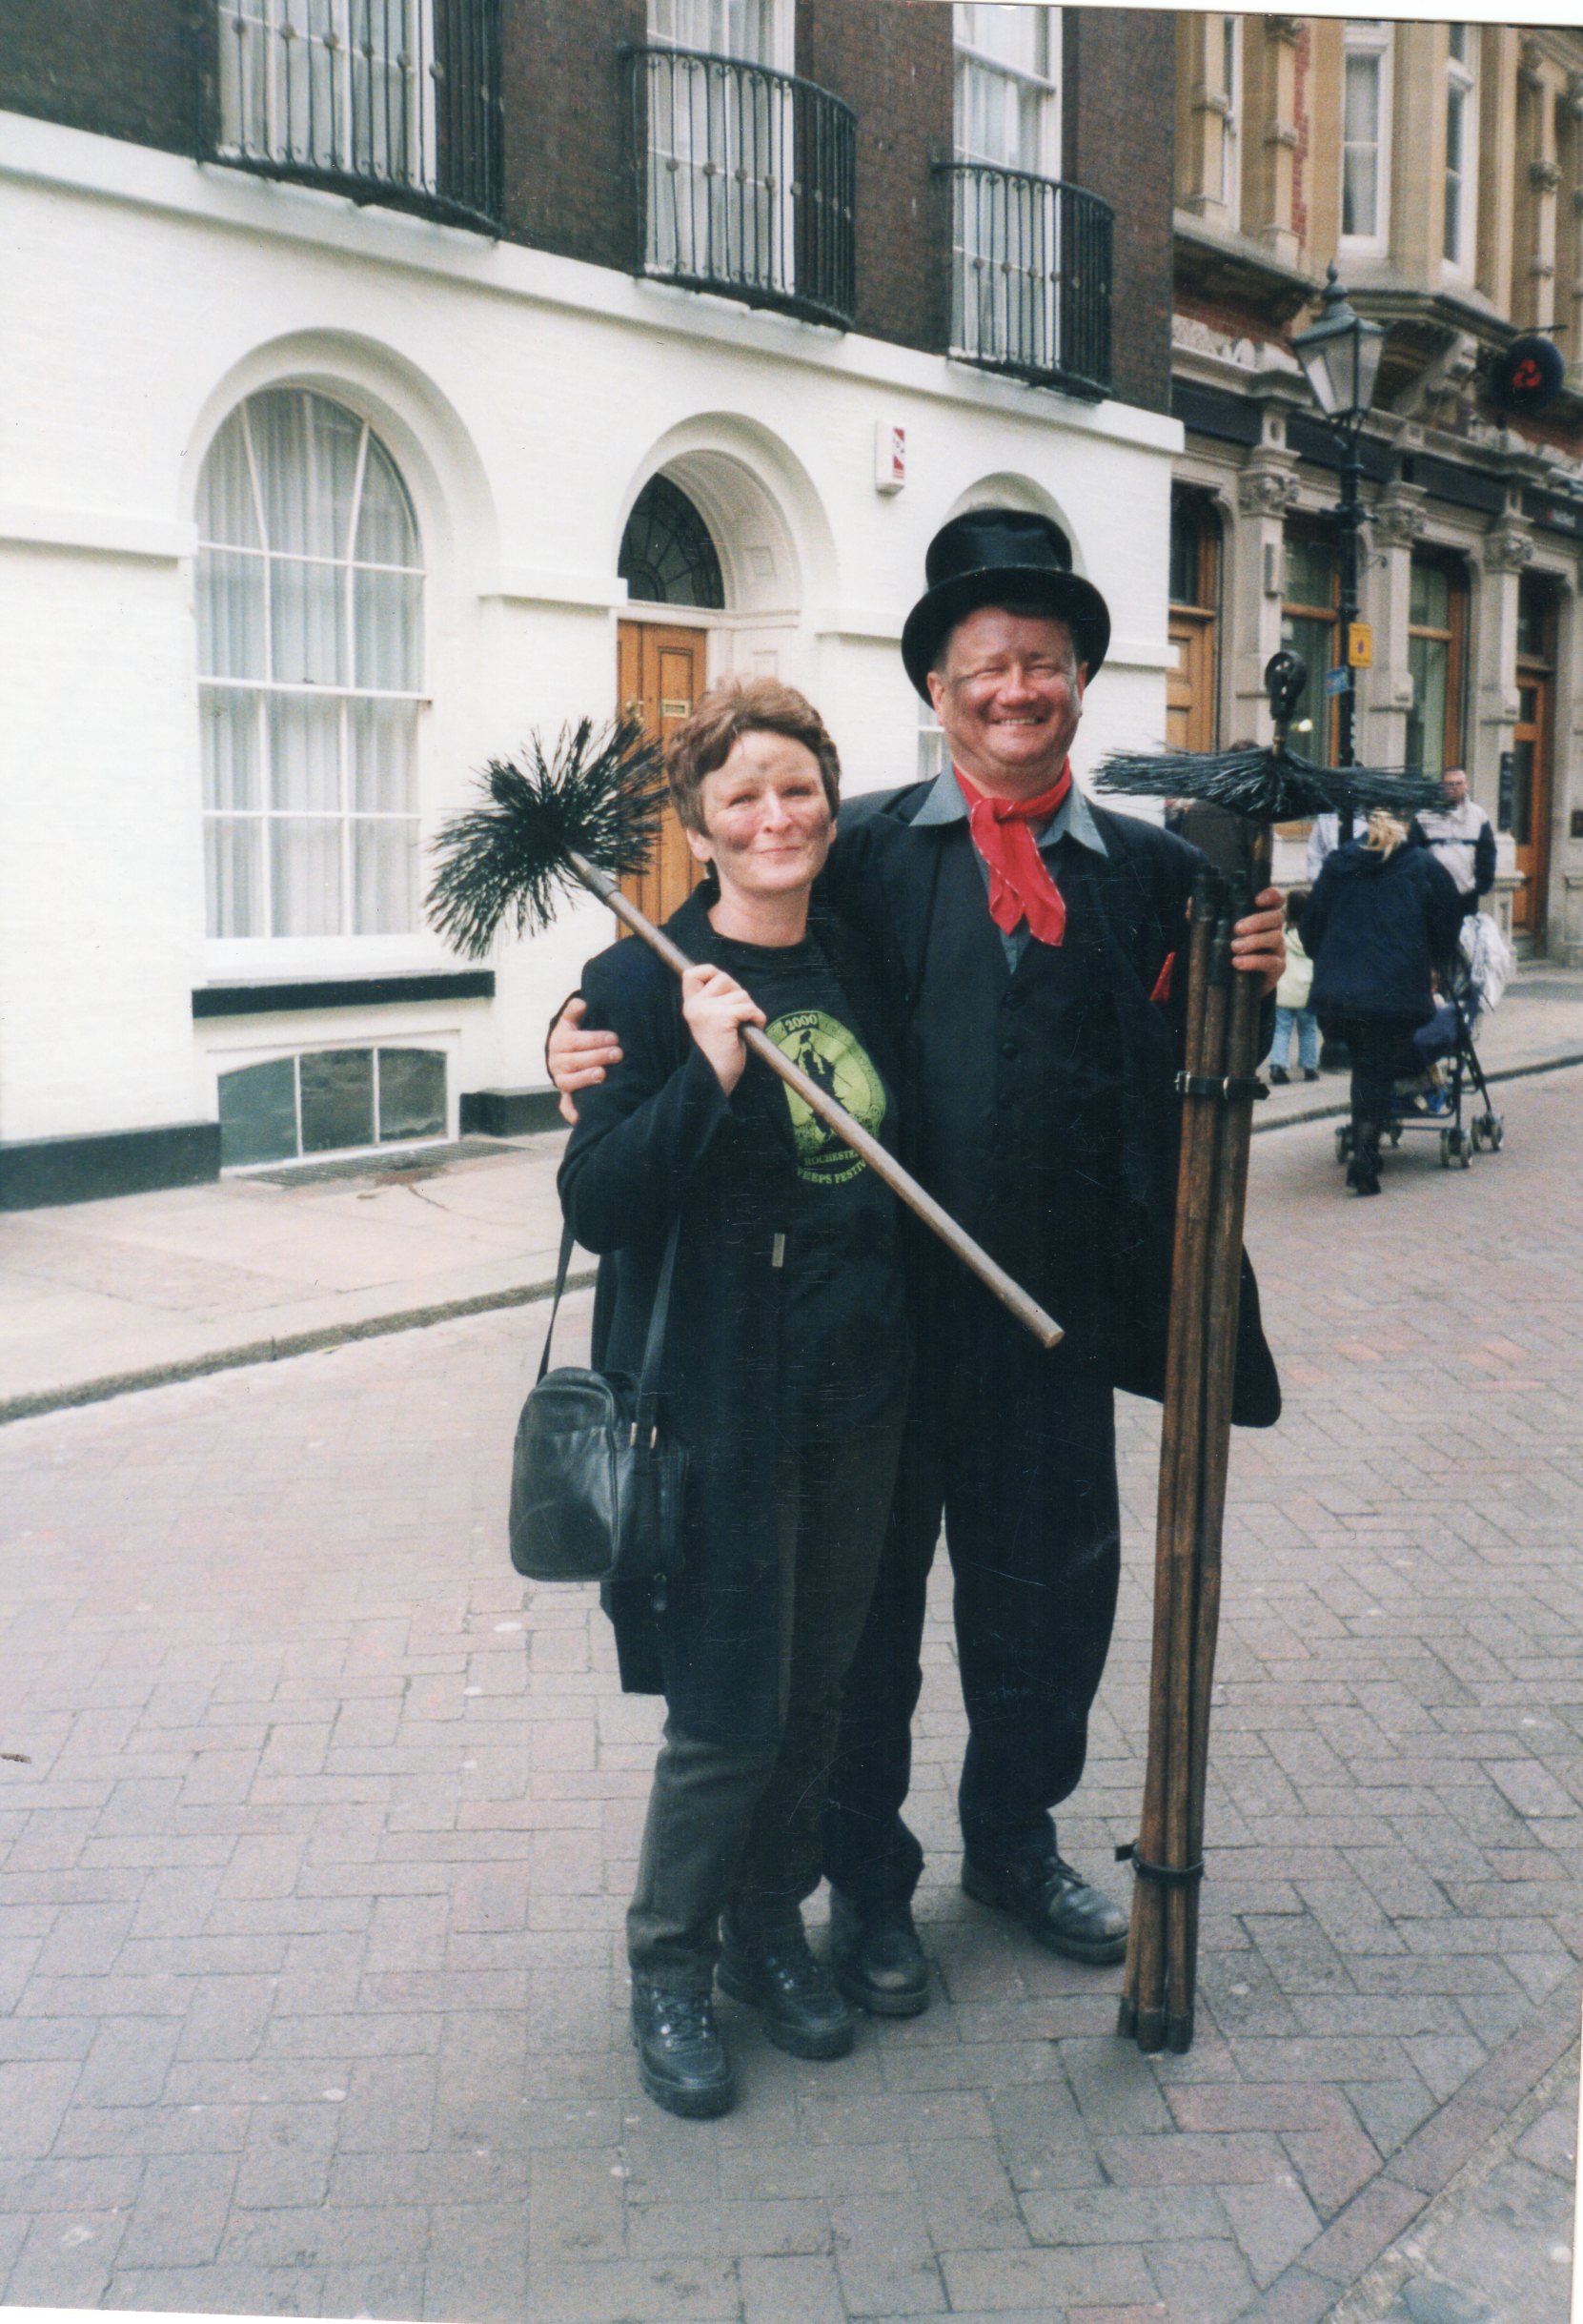 Lucky Chimney Sweep wedding services in Kent